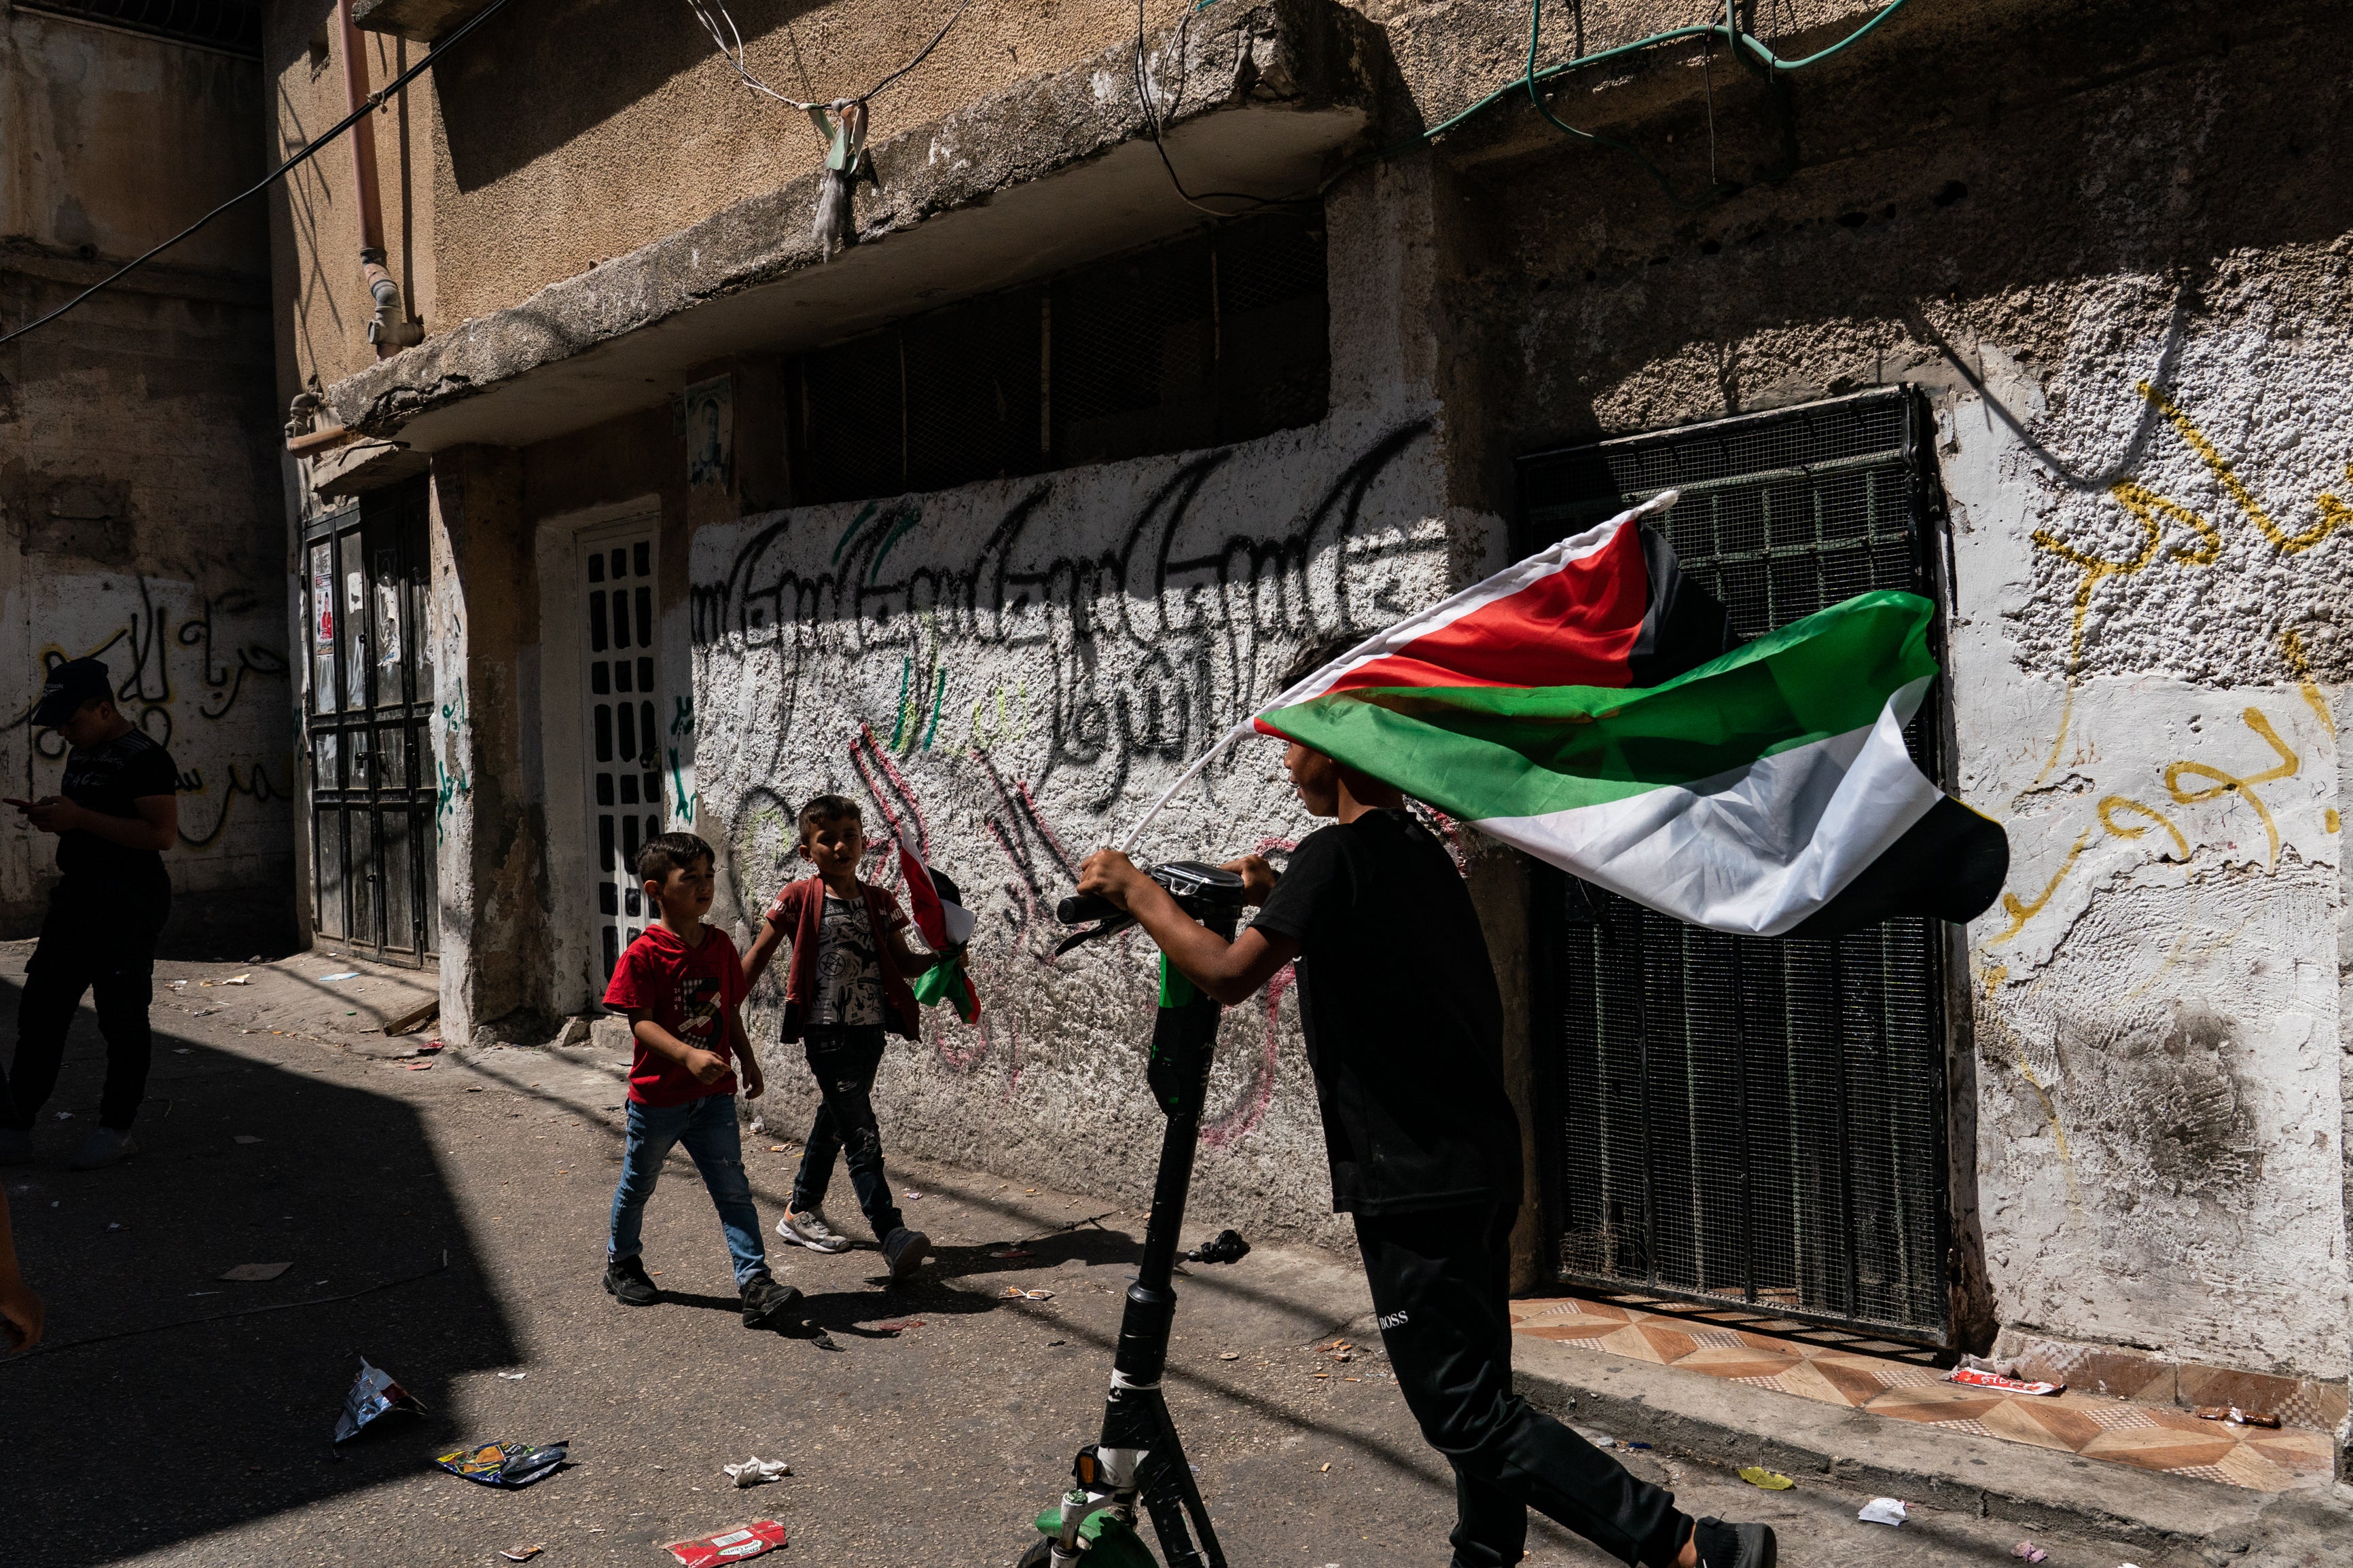 A boy holds a Palestinian flag ahead of the funeral for a teenager fatally shot by Israeli forces during a night raid near Nablus in the West Bank